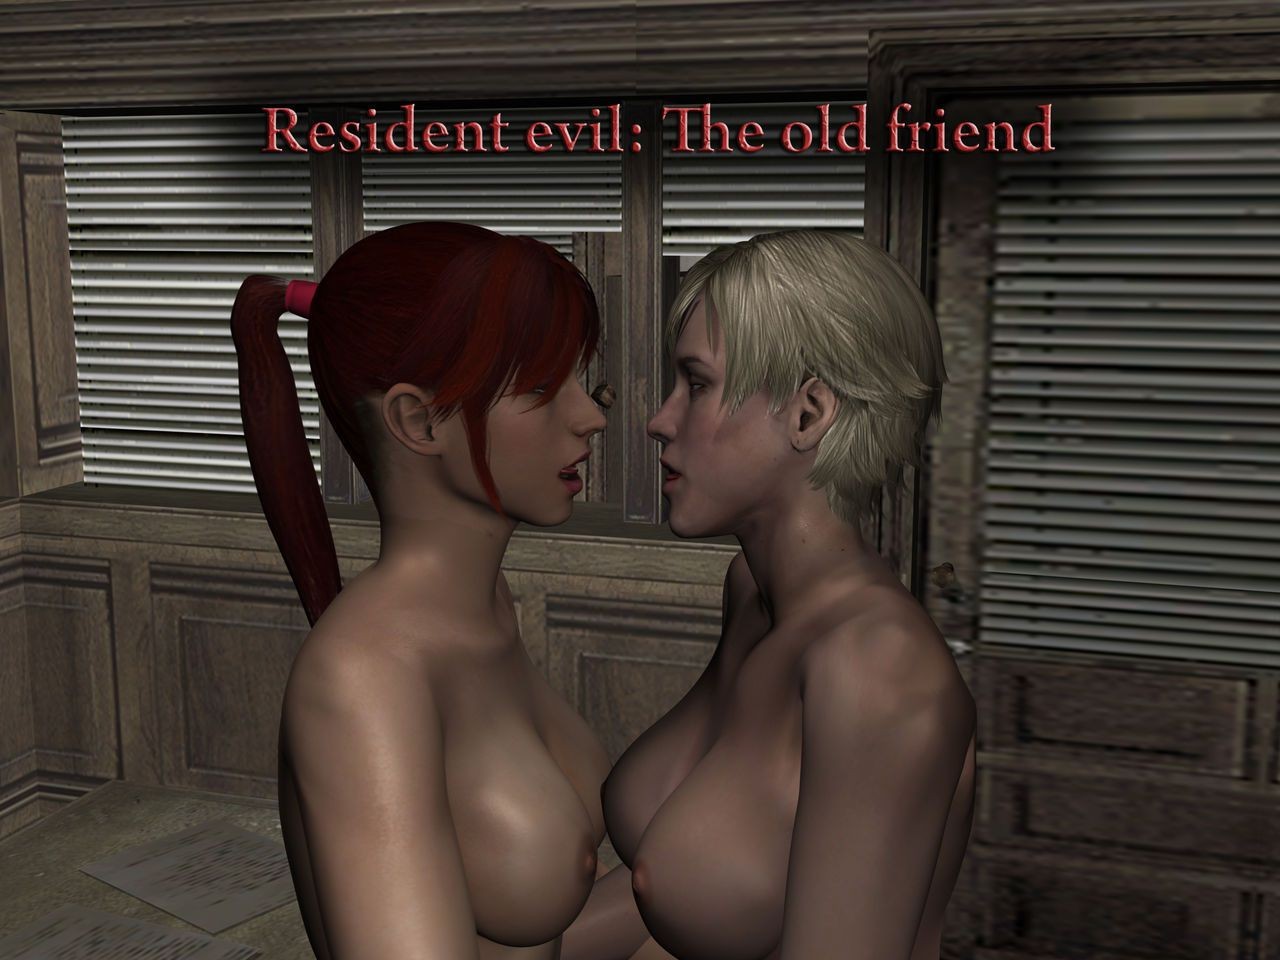 Gets Resident Evil: The Old Friend 19yo